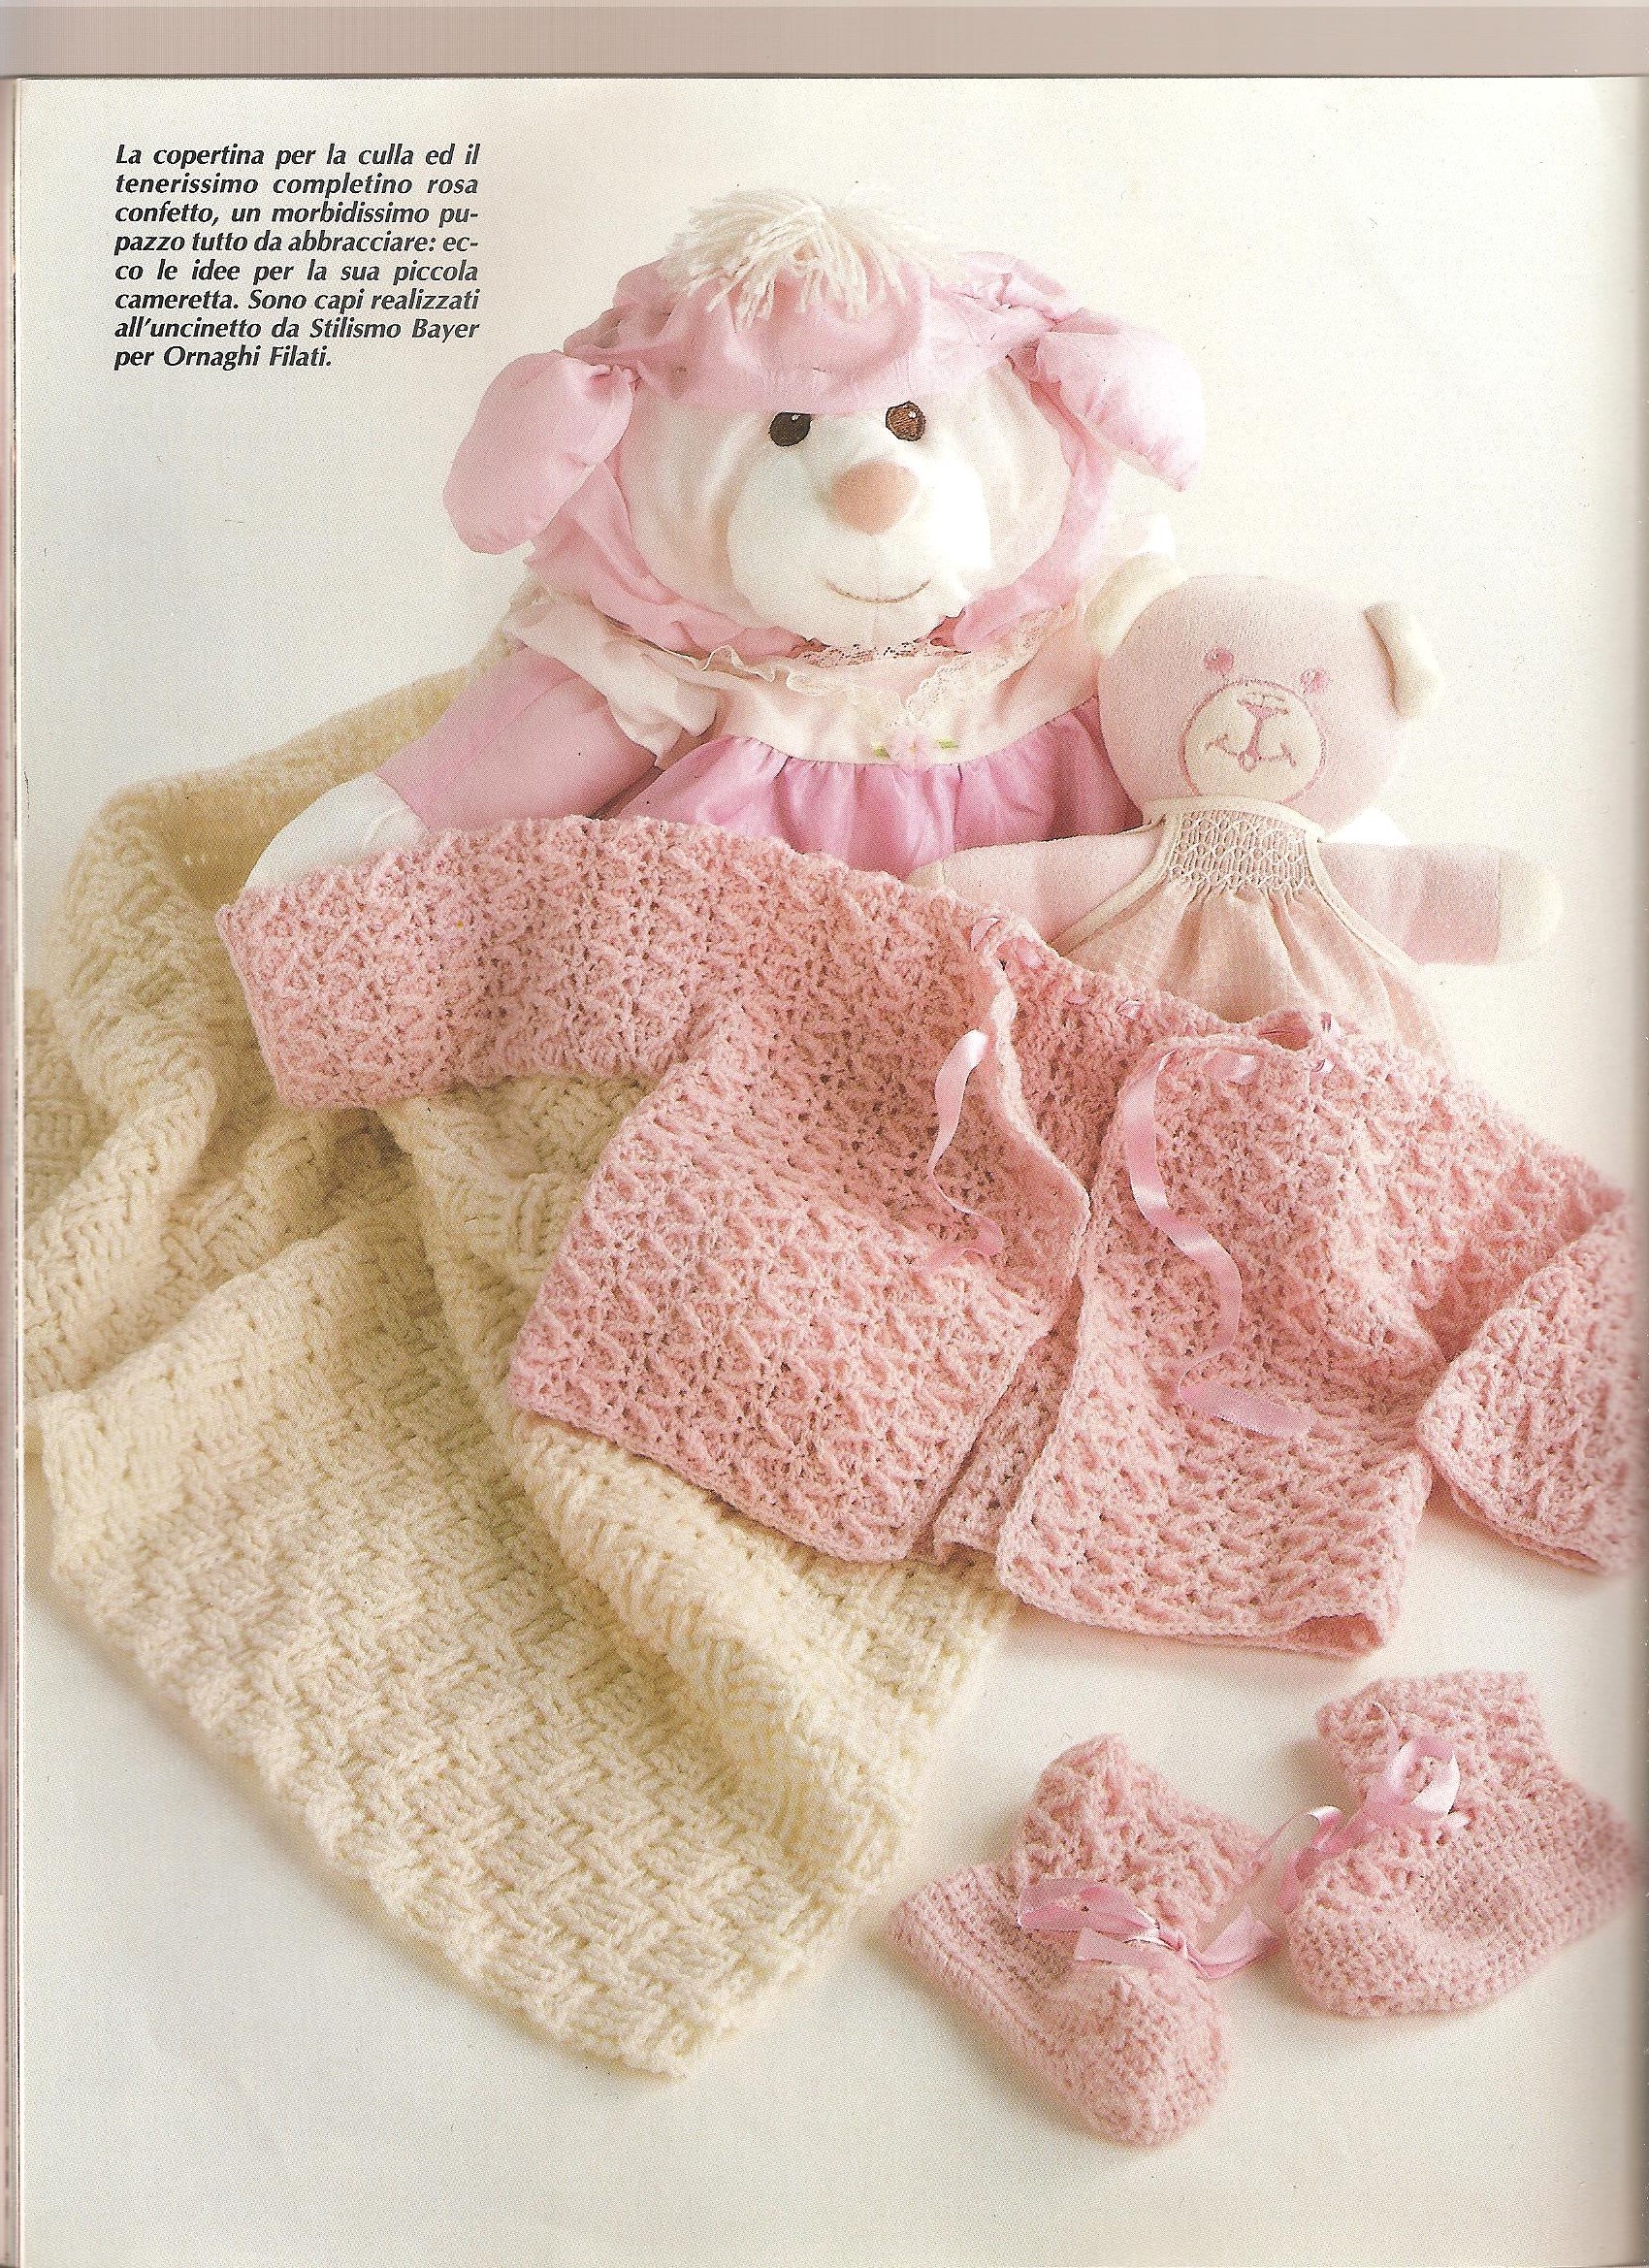 Crochet Baby Outifts Blanket and socks (1)